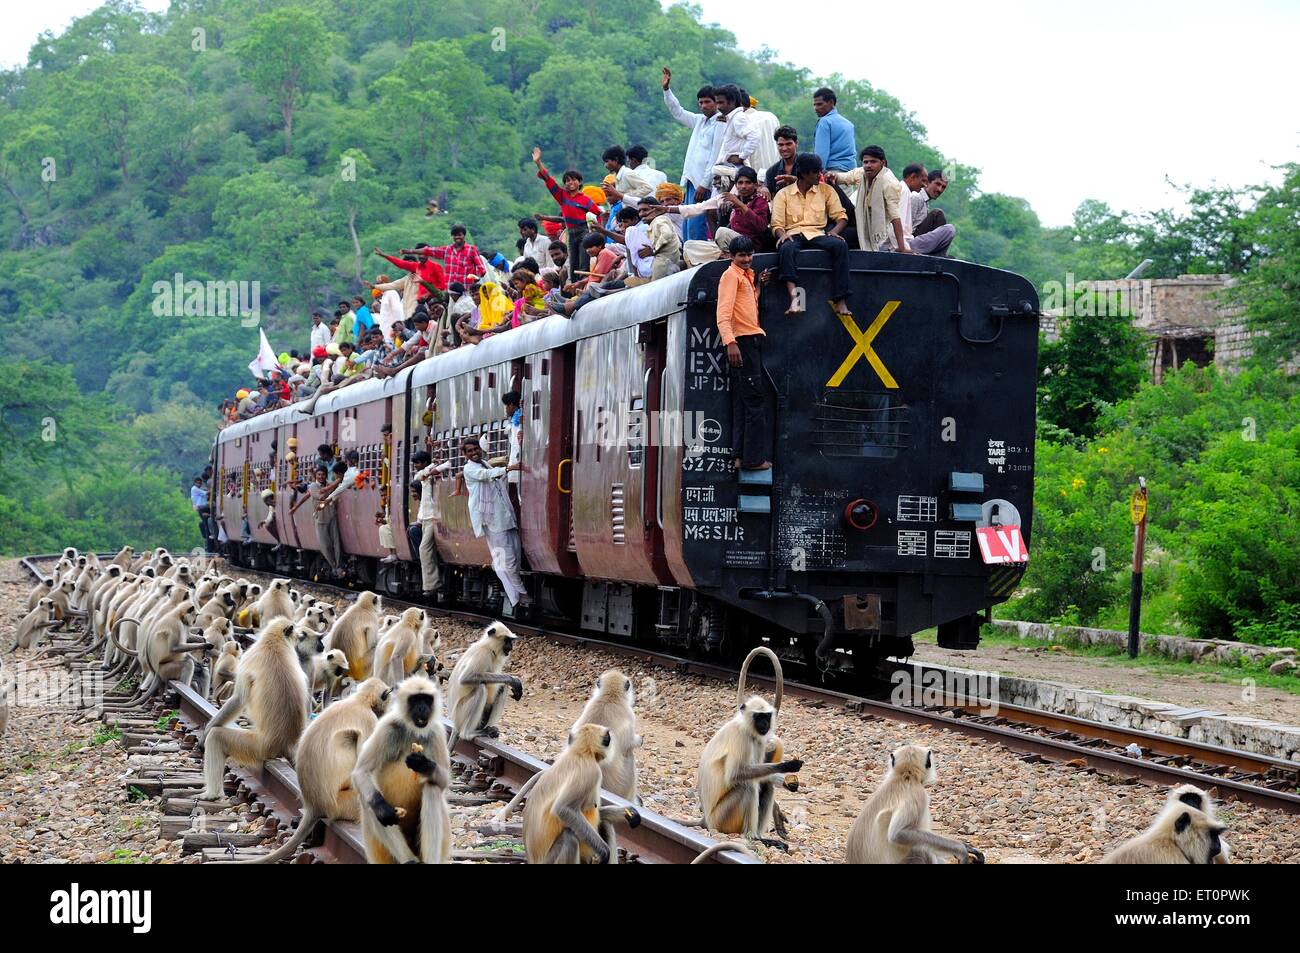 People taking risk while traveling on roof of train lots of monkeys sitting on track ; Rajasthan ; India Stock Photo